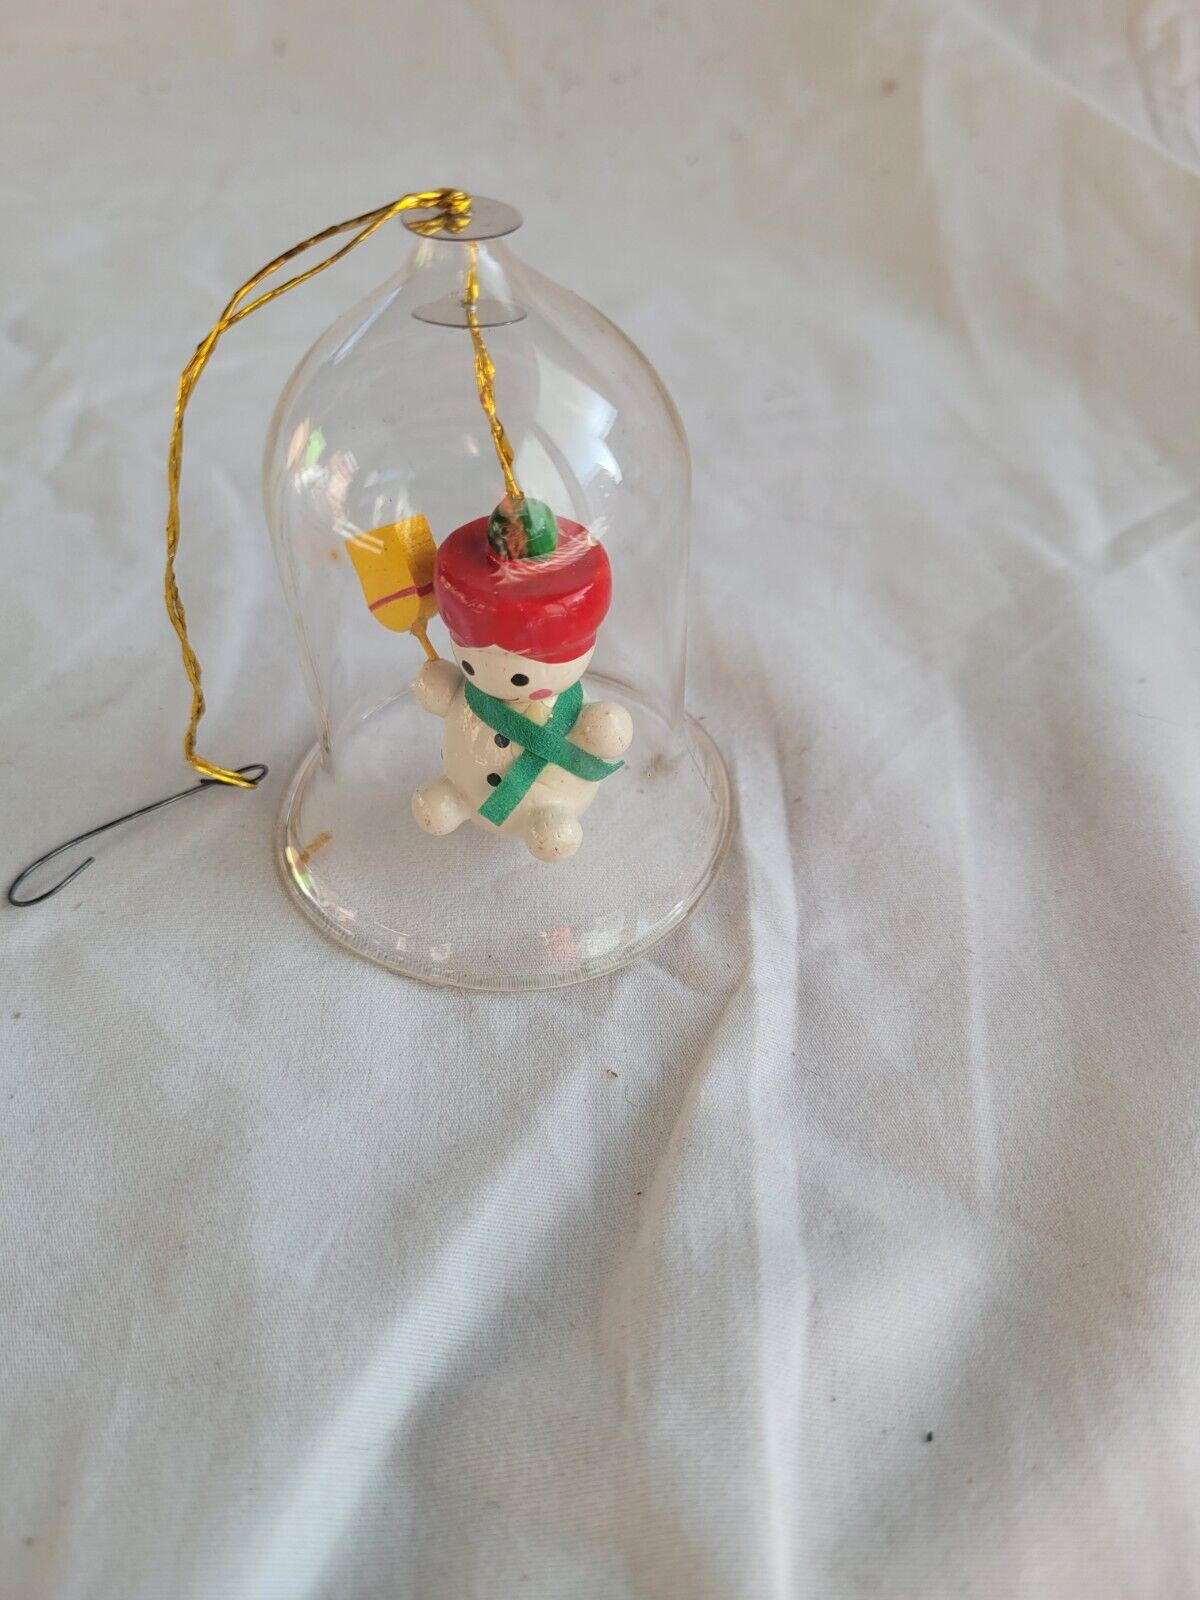 Vintage Clear Glass Bell Ornament of a Snowman